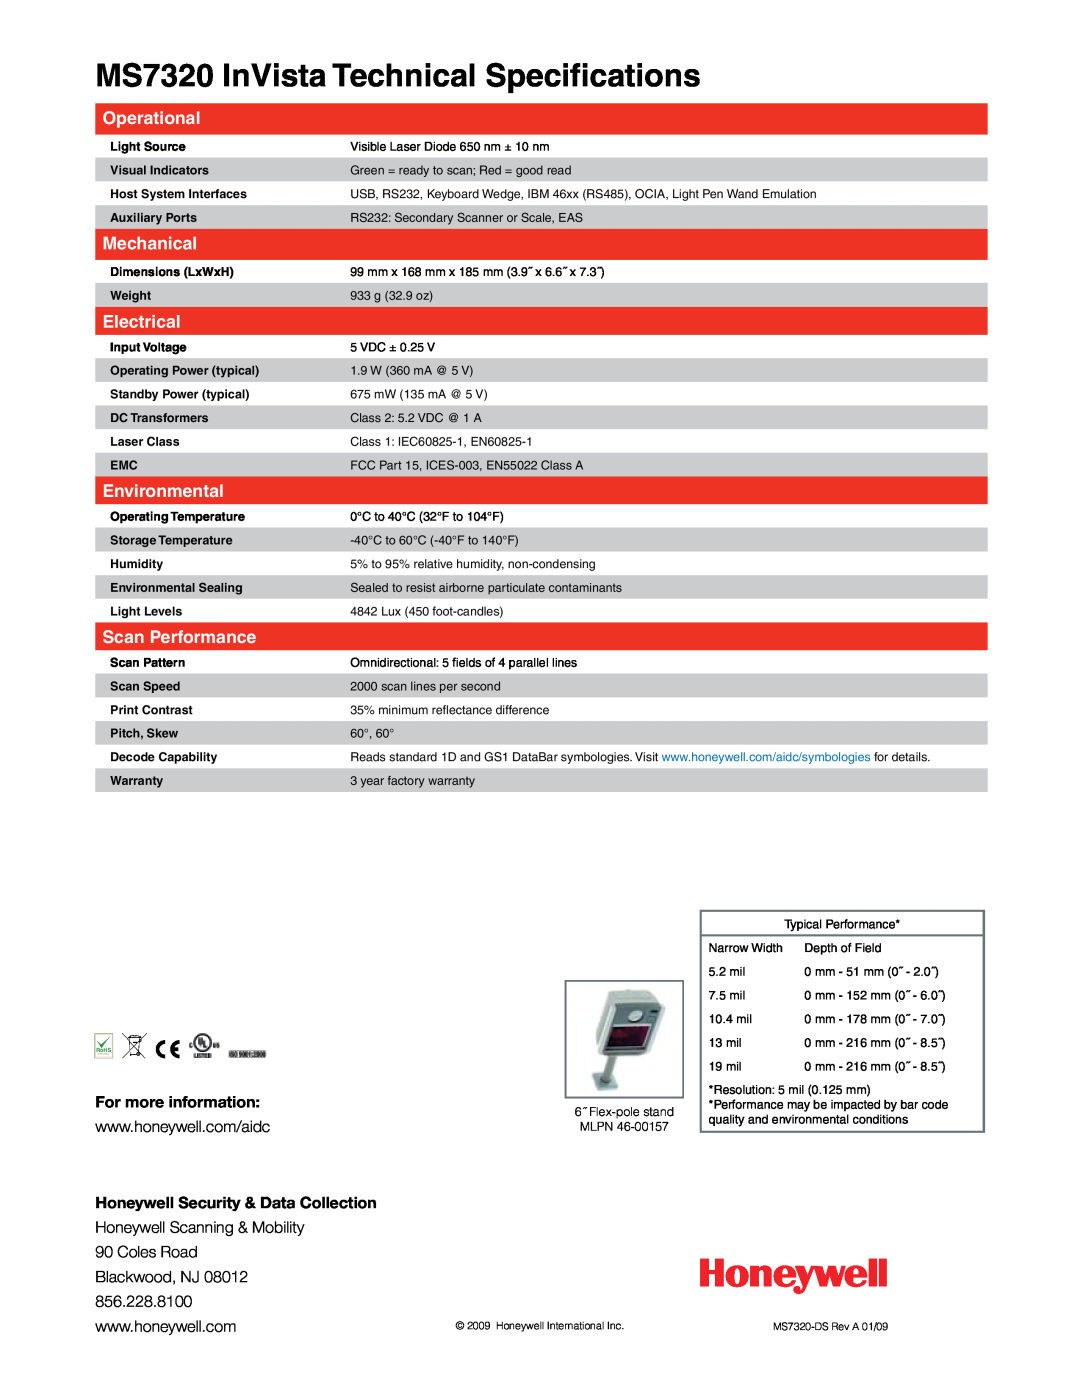 Honeywell MS7320 InVista Technical Specifications, Operational, Mechanical, Electrical, Environmental, Scan Performance 